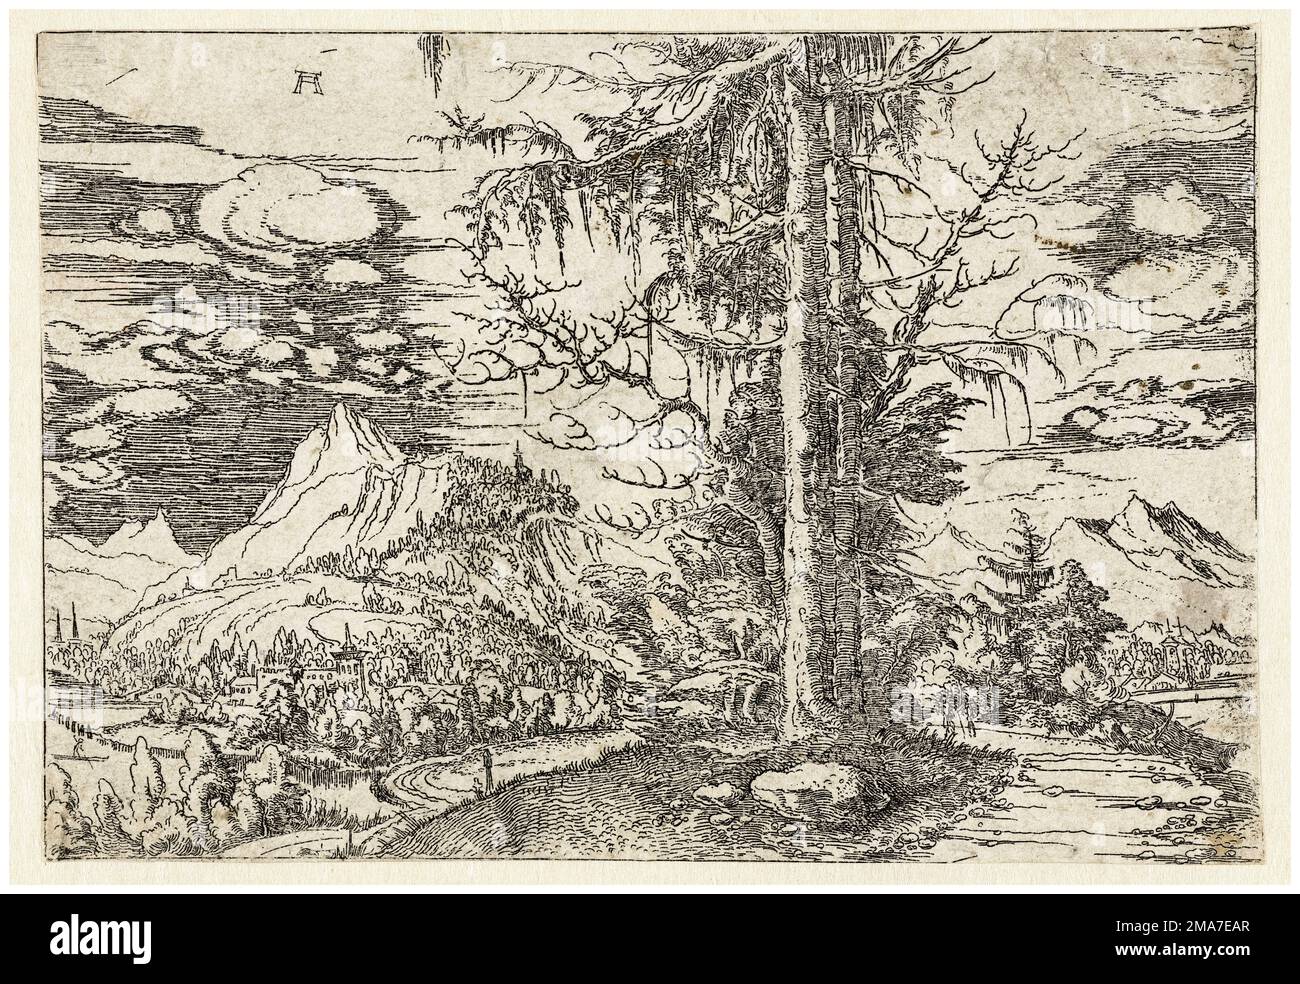 Albrecht Altdorfer, Landscape with a Double Spruce, etching, 1506-1522 Stock Photo